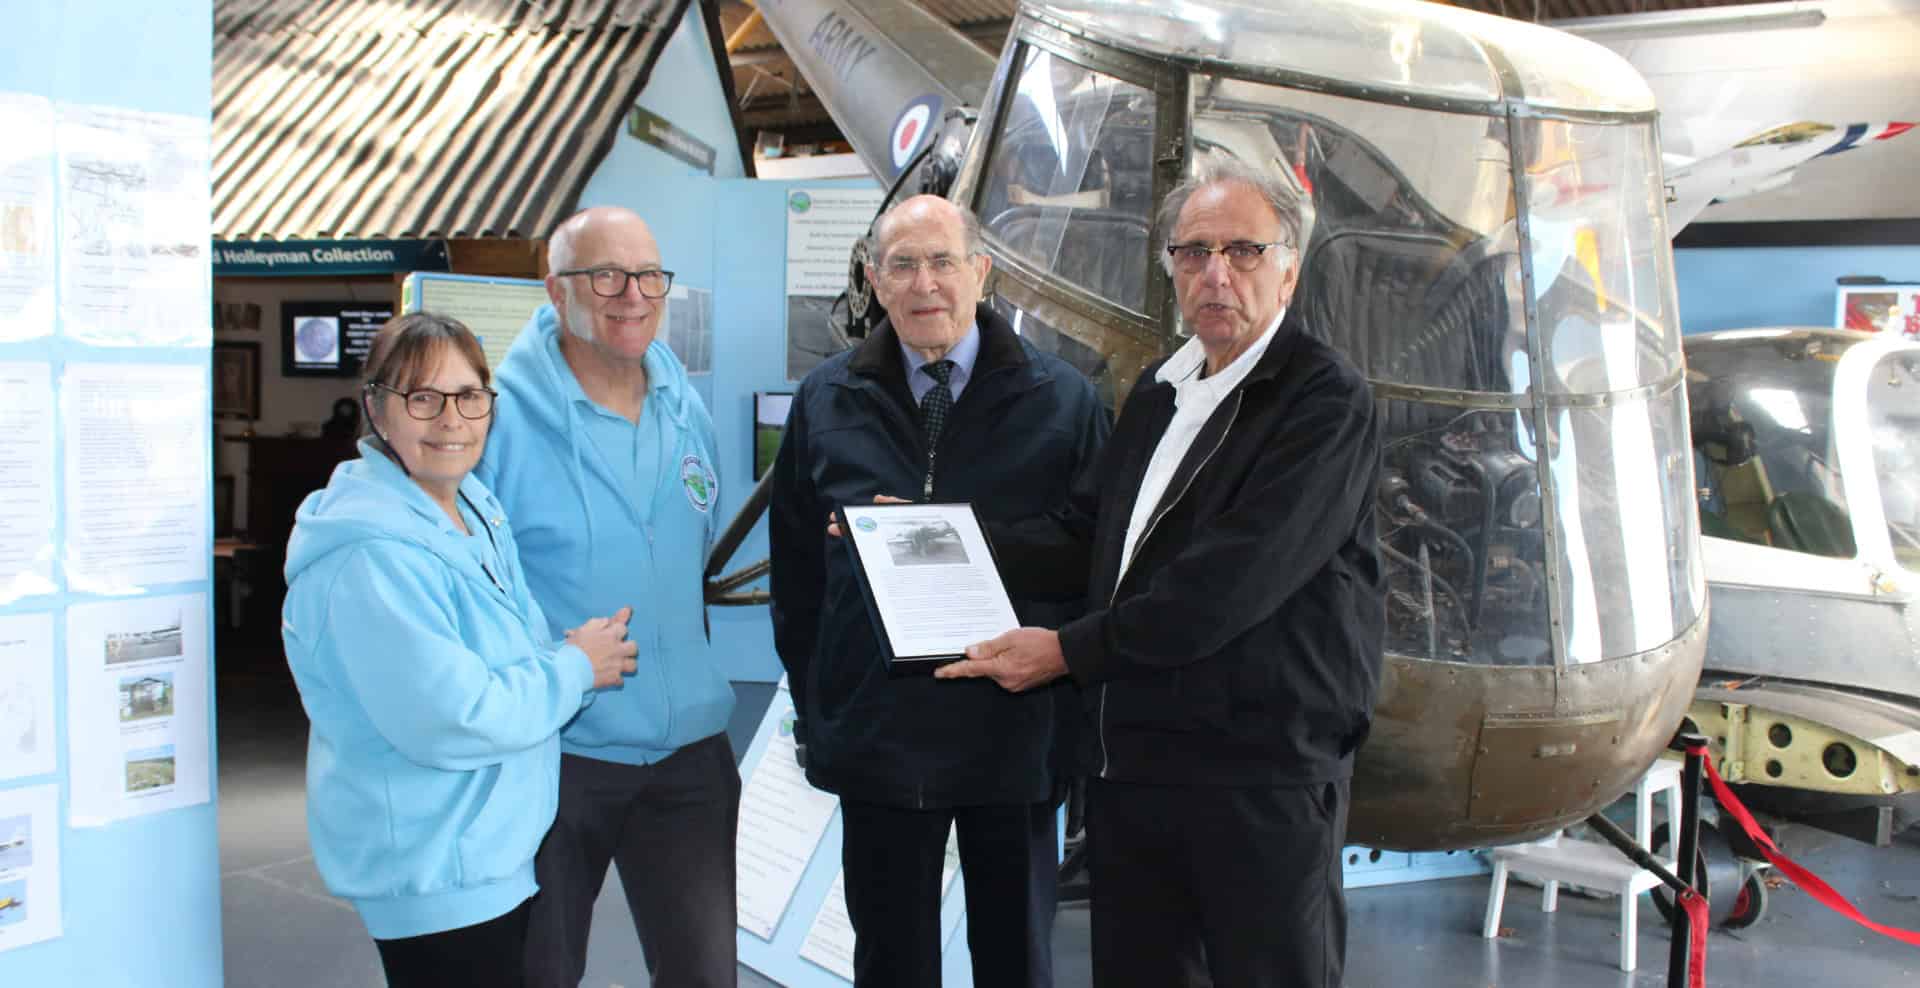 Gavin Stride visiting the Wight Aviation Museum